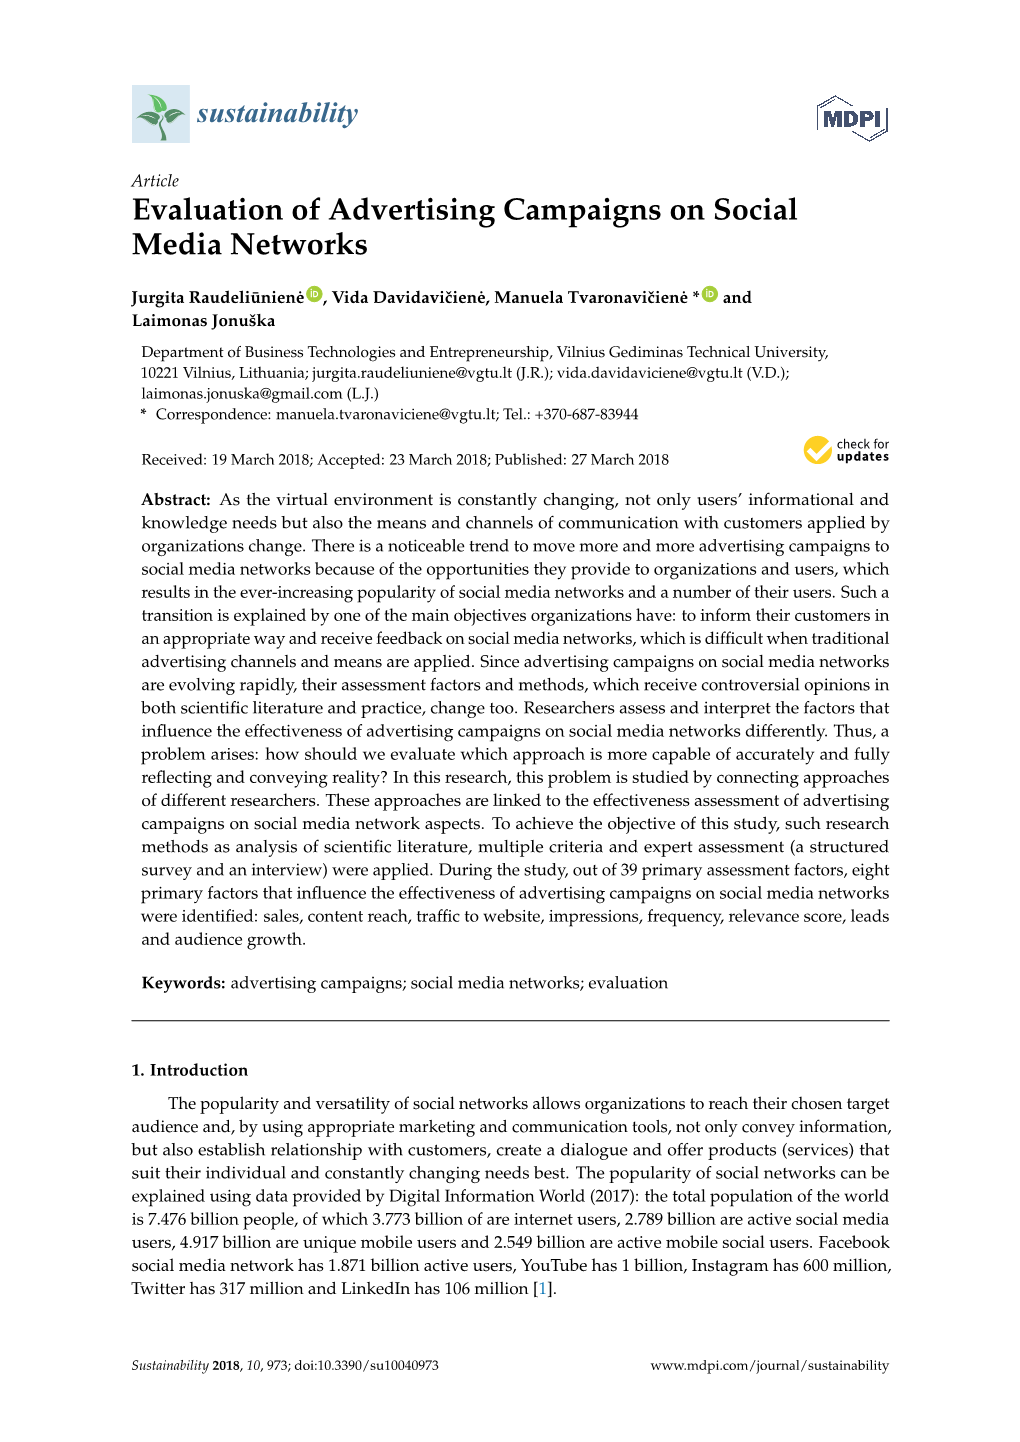 Evaluation of Advertising Campaigns on Social Media Networks